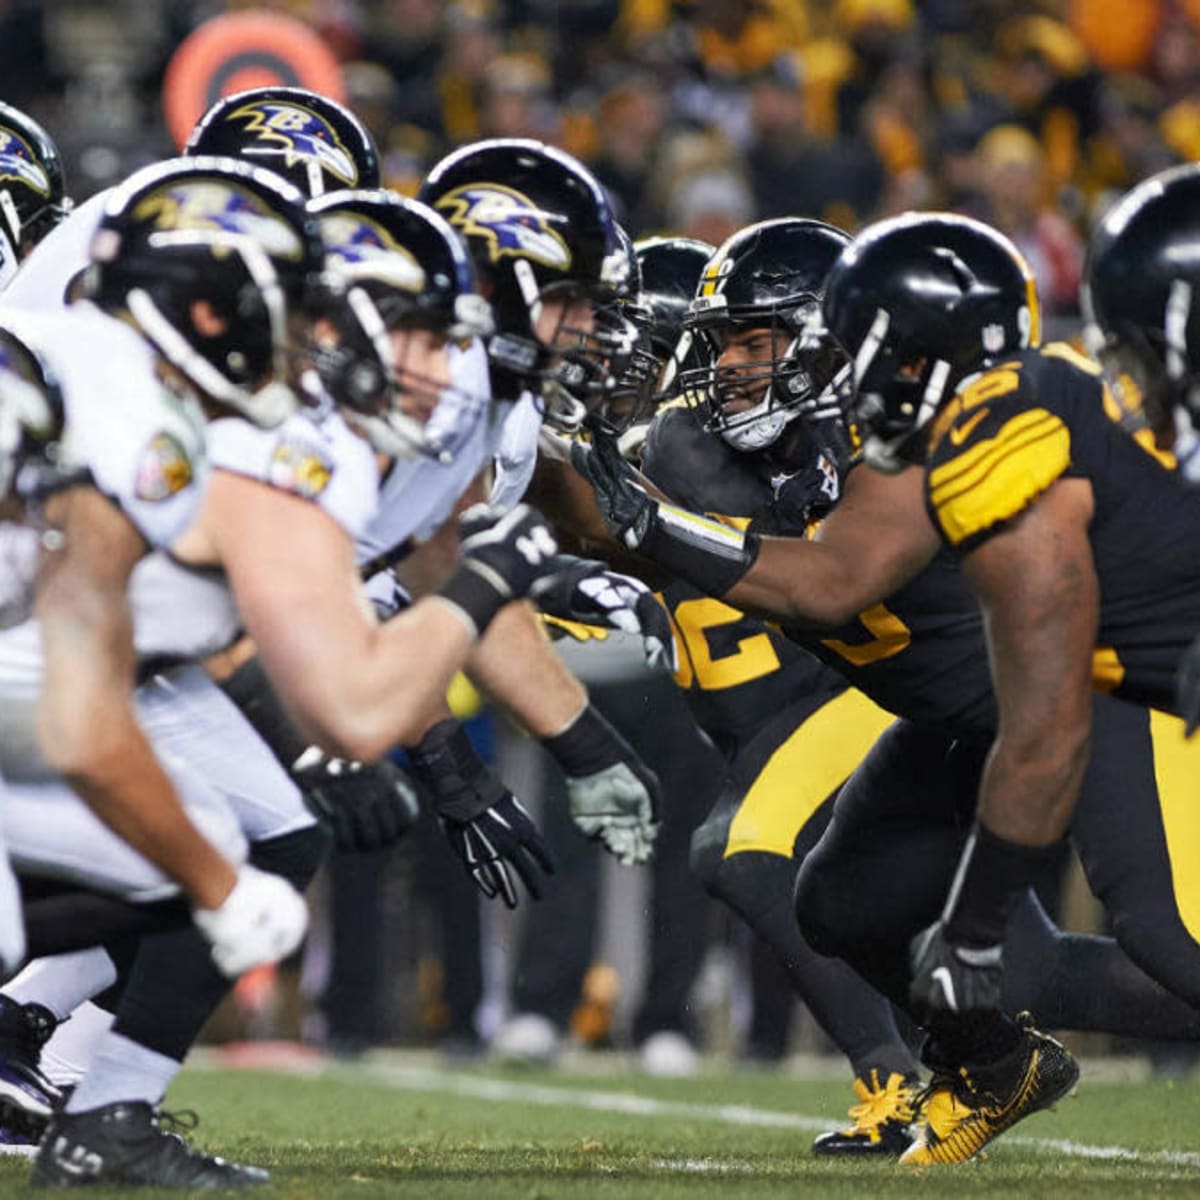 Ravens-Steelers Week 13 Preview, Prediction, Where to Watch